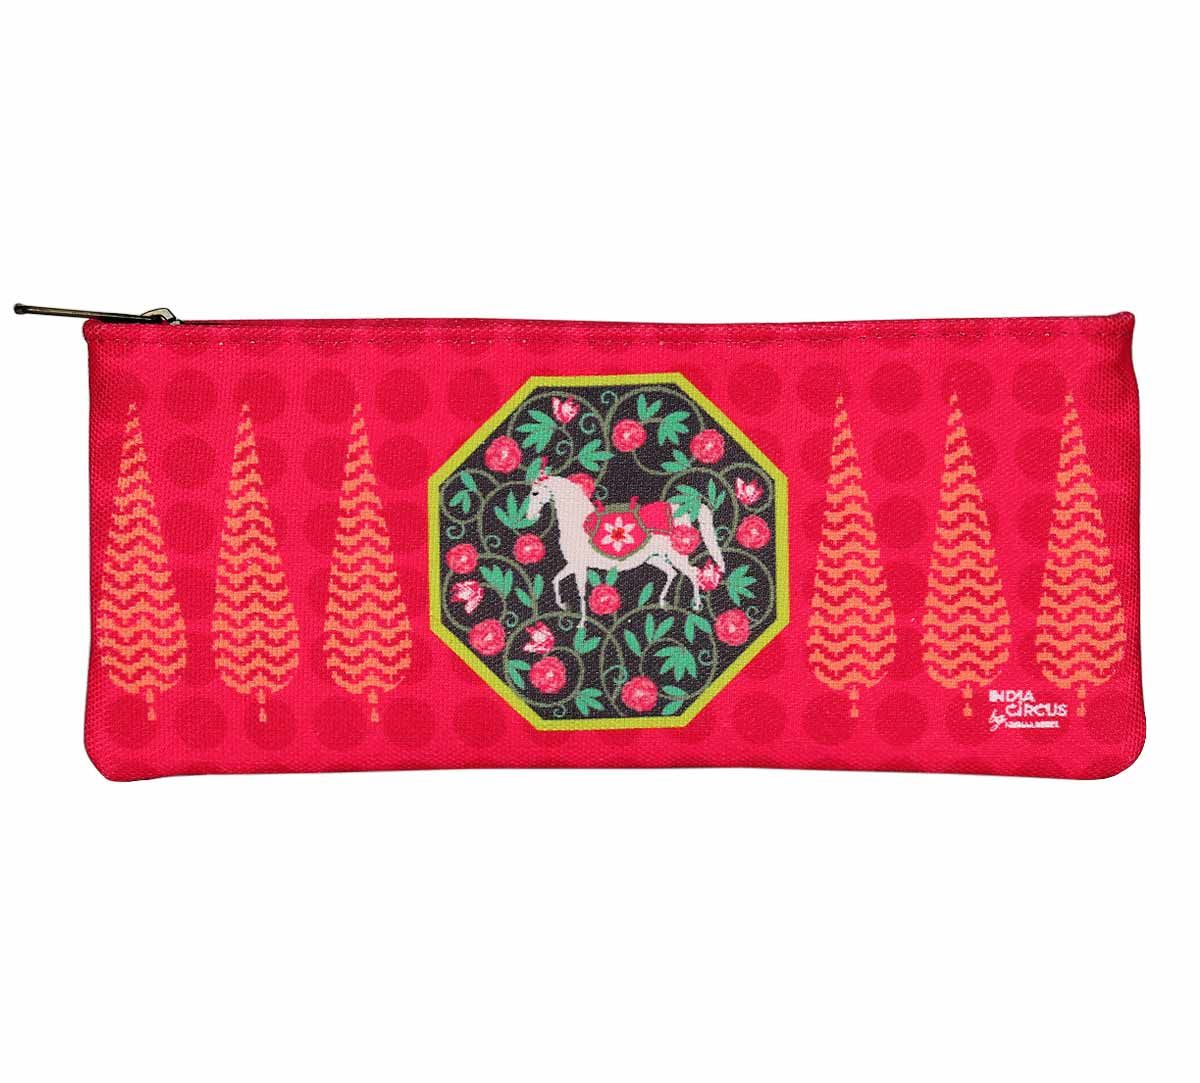 India Circus Conifer Stallion Reiteration Small Makeup Pouch